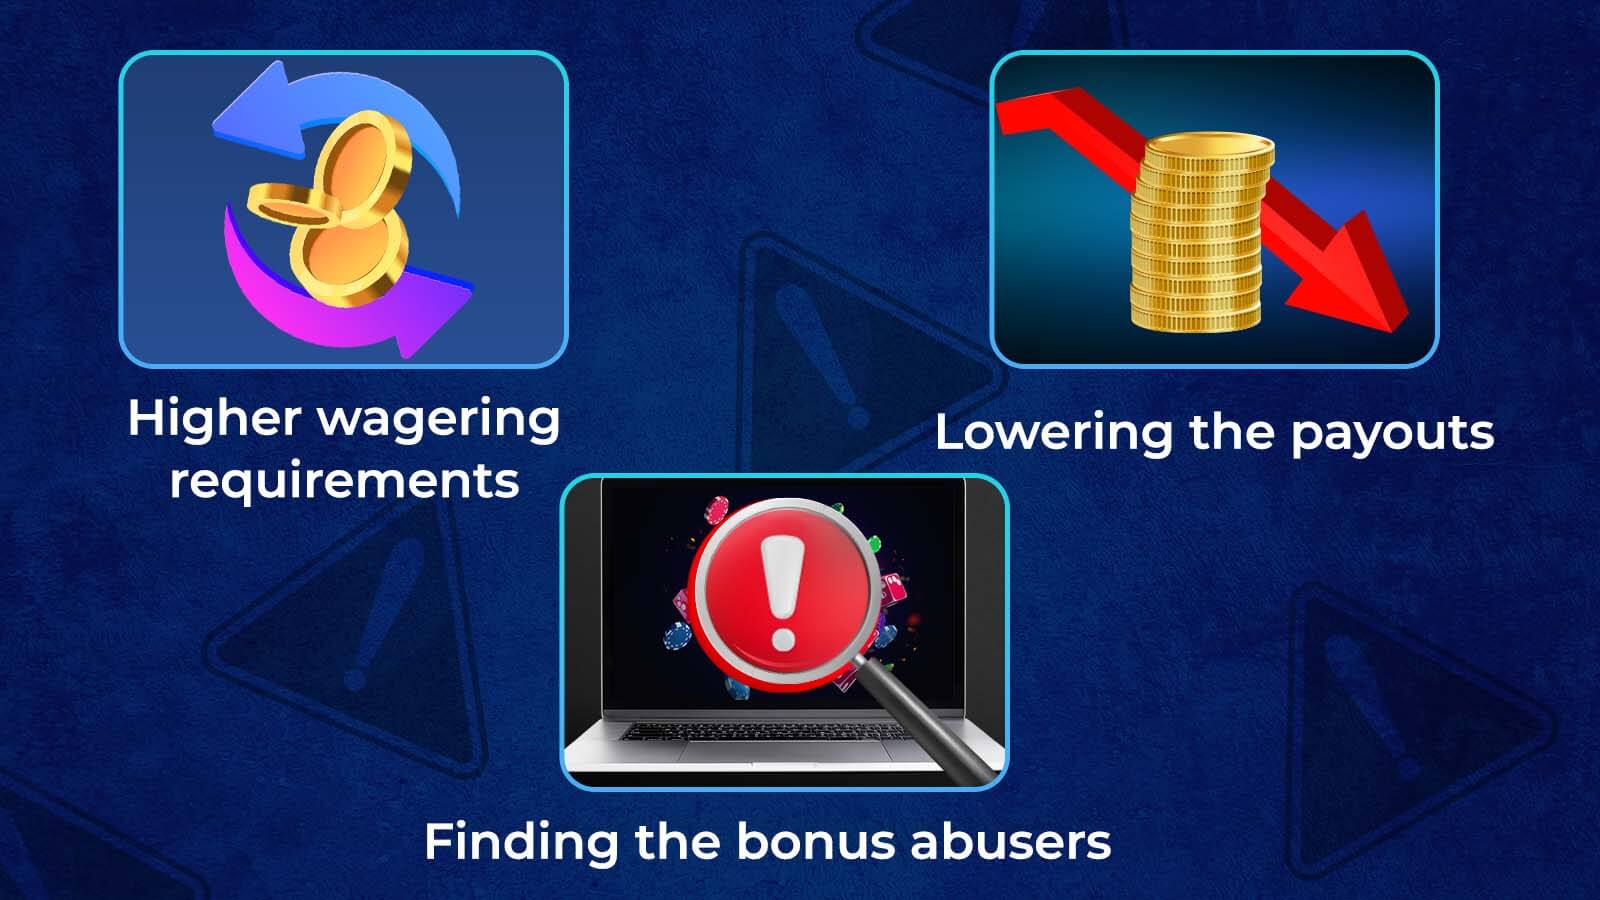 How can online casinos find and stop bonus abusers